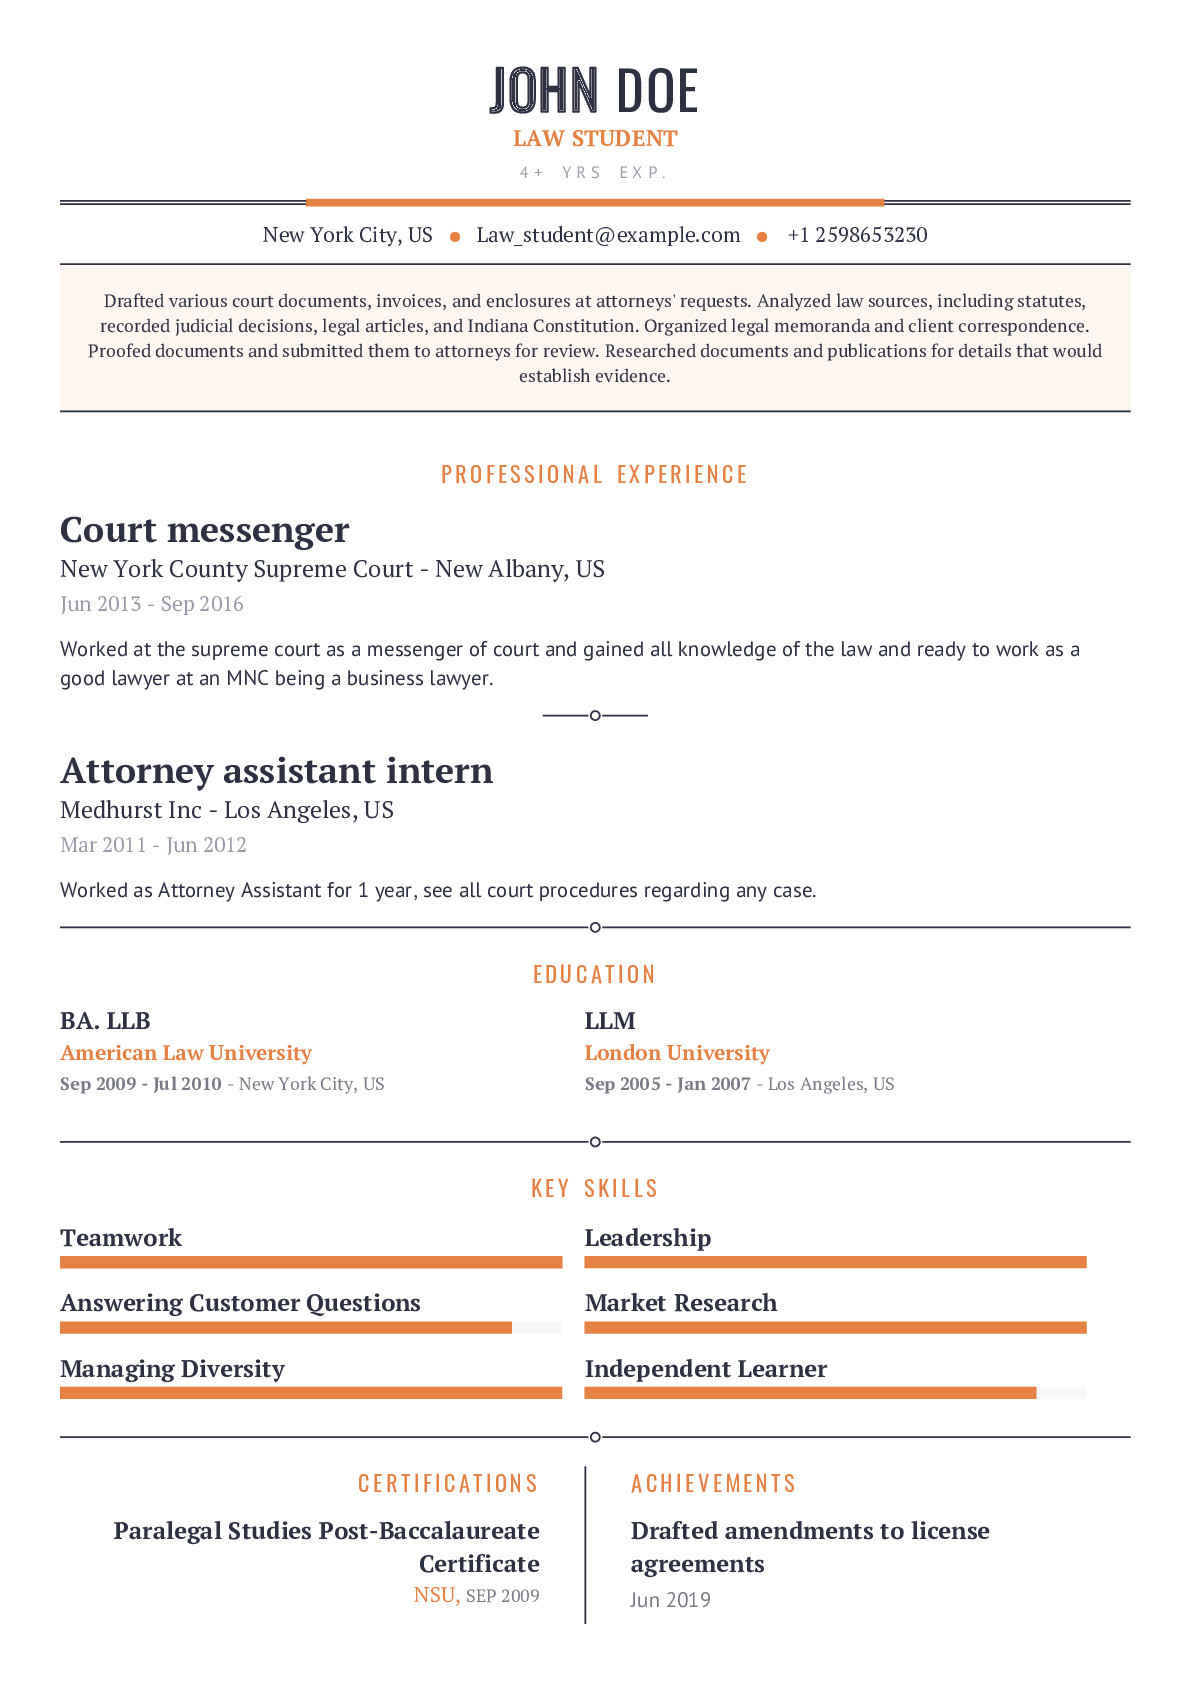 Third Year Law Student Resume Sample Law Student Resume Example with Content Sample Craftmycv